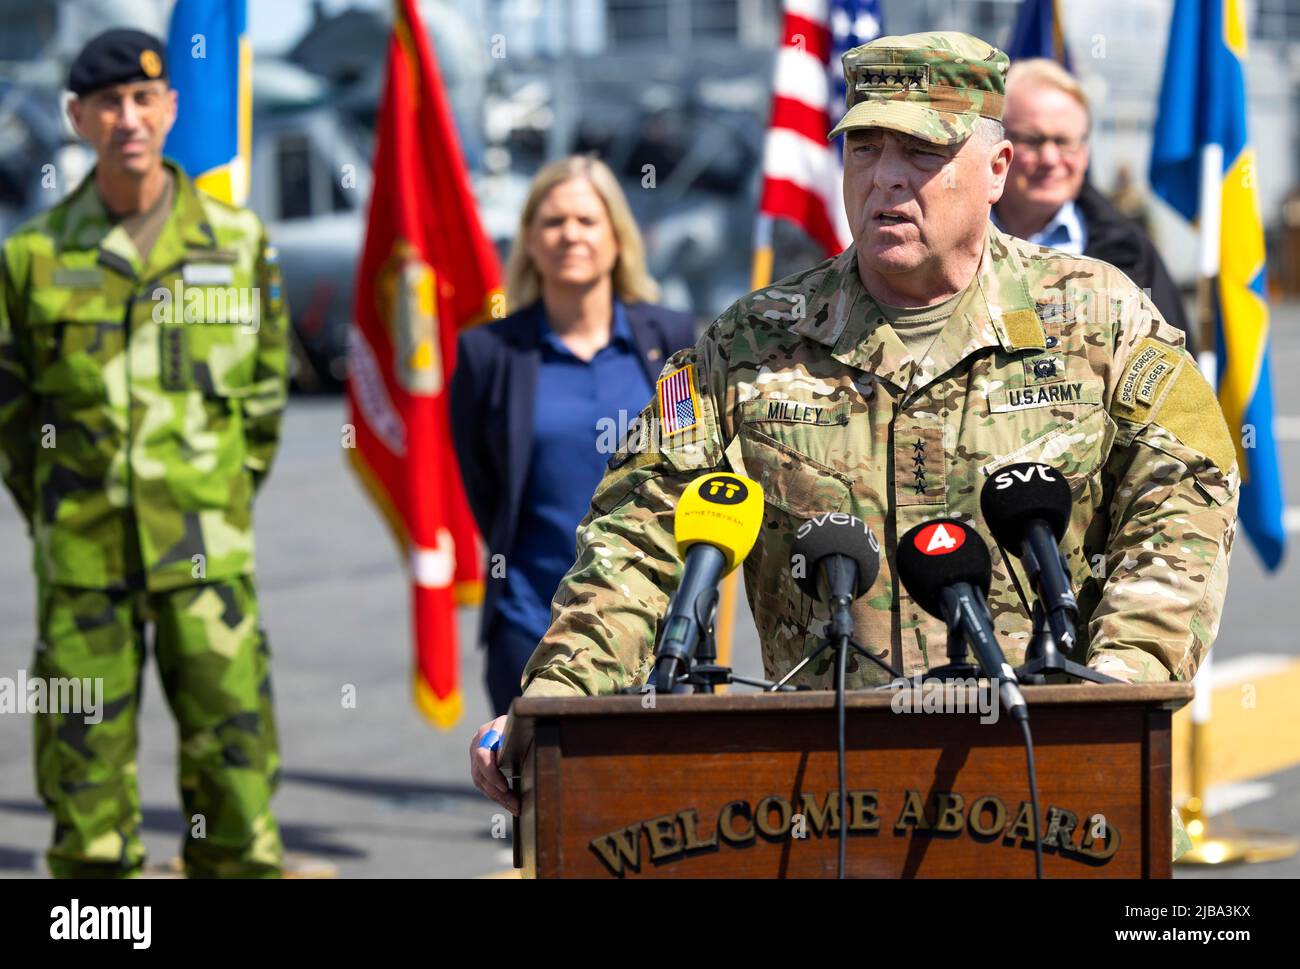 US Chairman of the Joint Chiefs of Staff, General Mark Milley speaks during a press conference, also attended by (L-R) Swedish Supreme Commander Micael Bydén, Swedish Prime Minister Magdalena Andersson and Swedish Defence Minister Peter Hultqvist, aboard the American amphibious warship USS Kearsarge in Stockholm, Sweden, on June 04, 2022, ahead of the Baltic Operations 'Baltops 22' exercise that will take place from June 5 to 17 in the Baltic Sea. Foto: Fredrik Persson / TT / kod 1081 Stock Photo